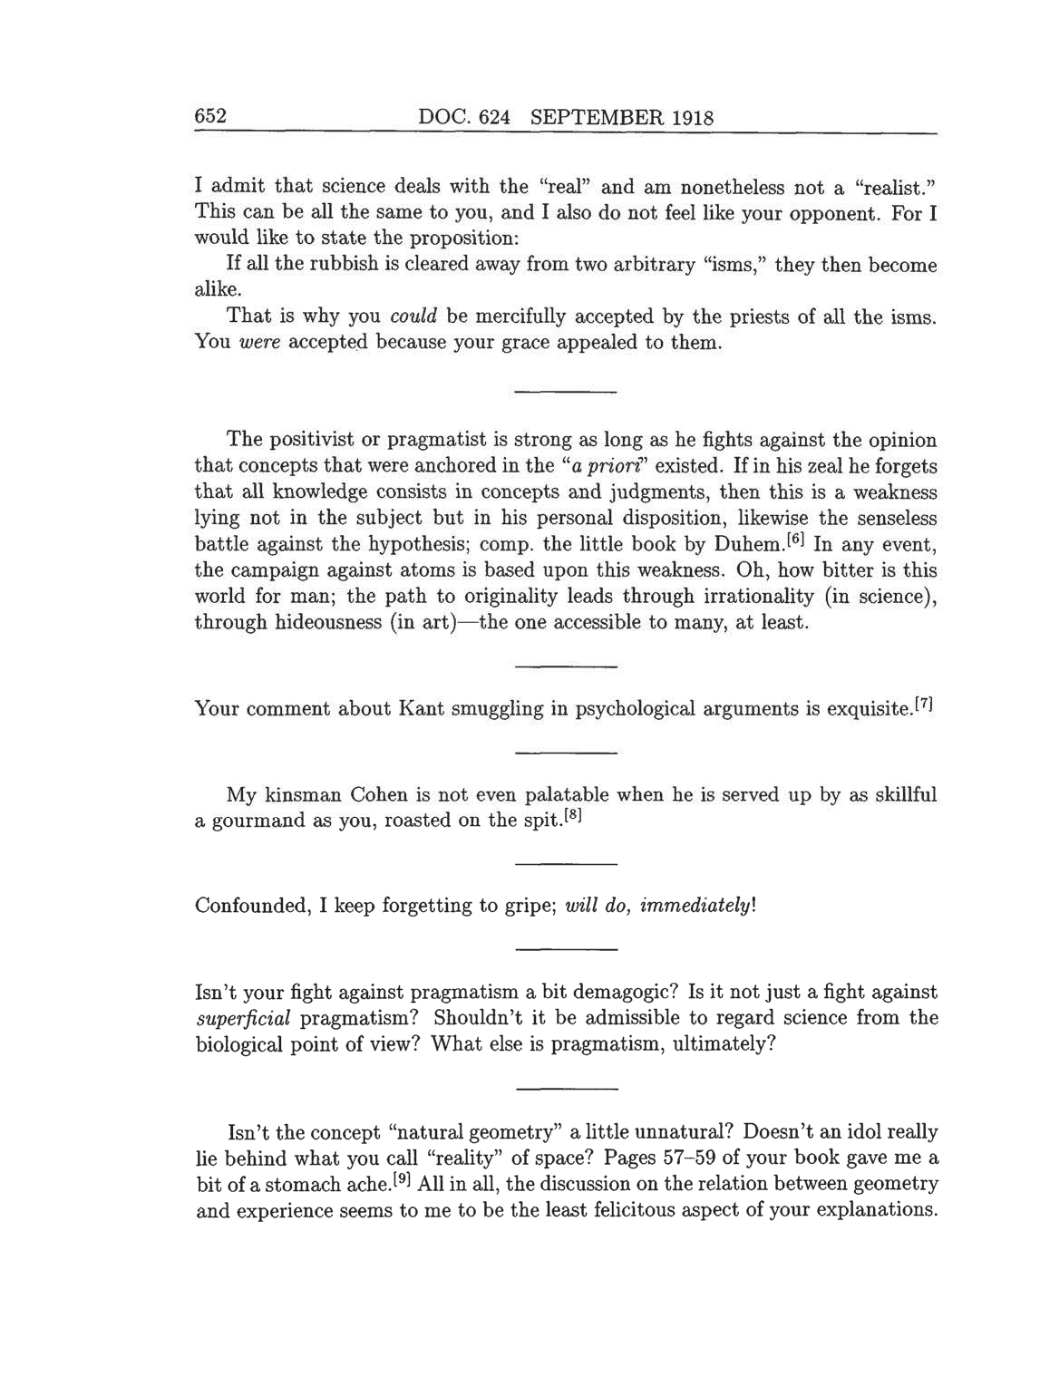 Volume 8: The Berlin Years: Correspondence, 1914-1918 (English translation supplement) page 652